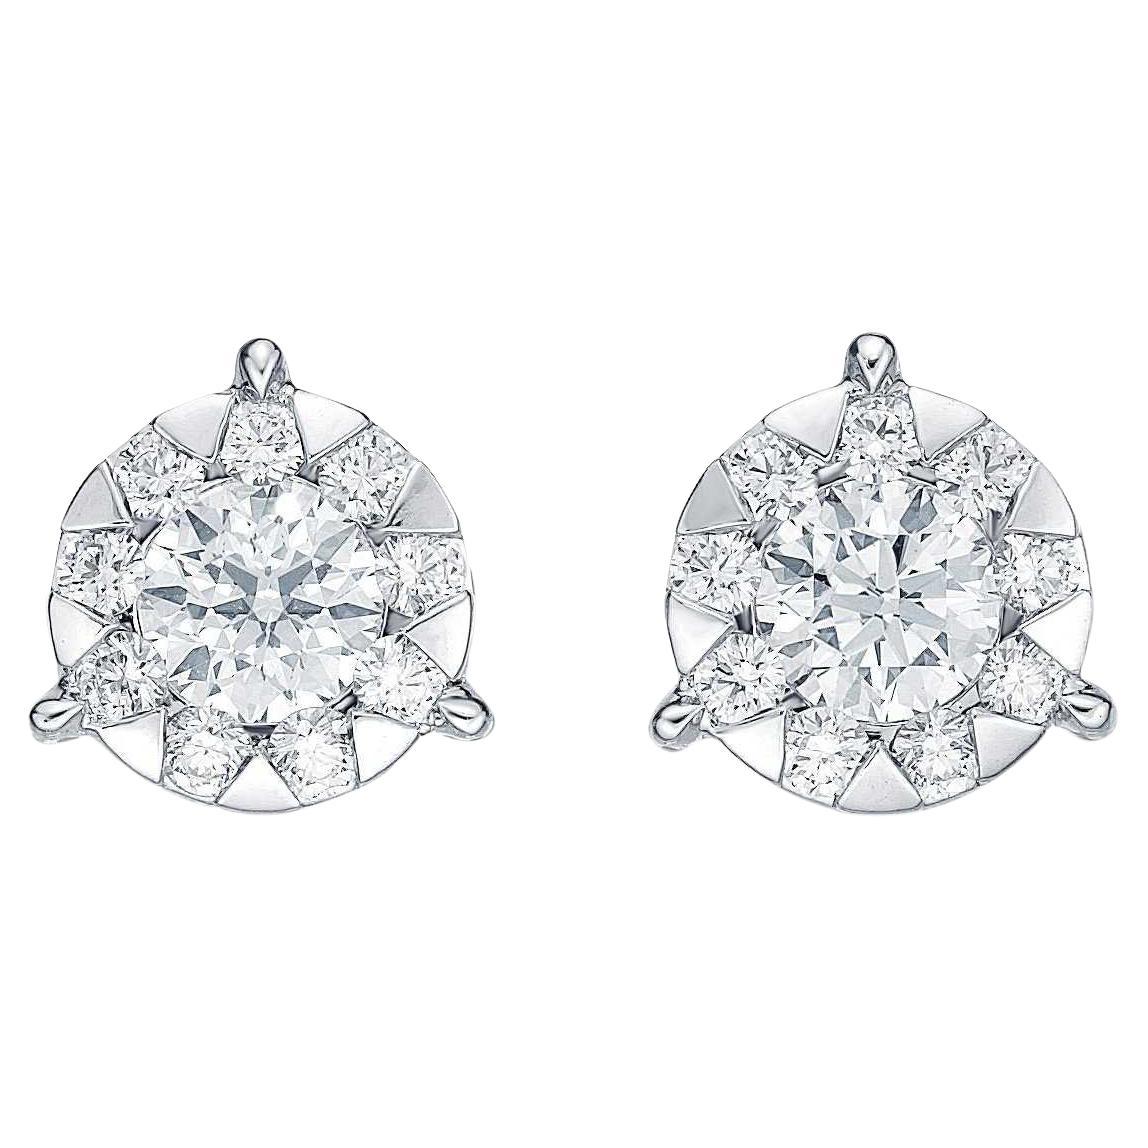 Memoire Bouquet Collection Diamond Stud Earrings 1.33 ct with "Look" of 3 Carat For Sale